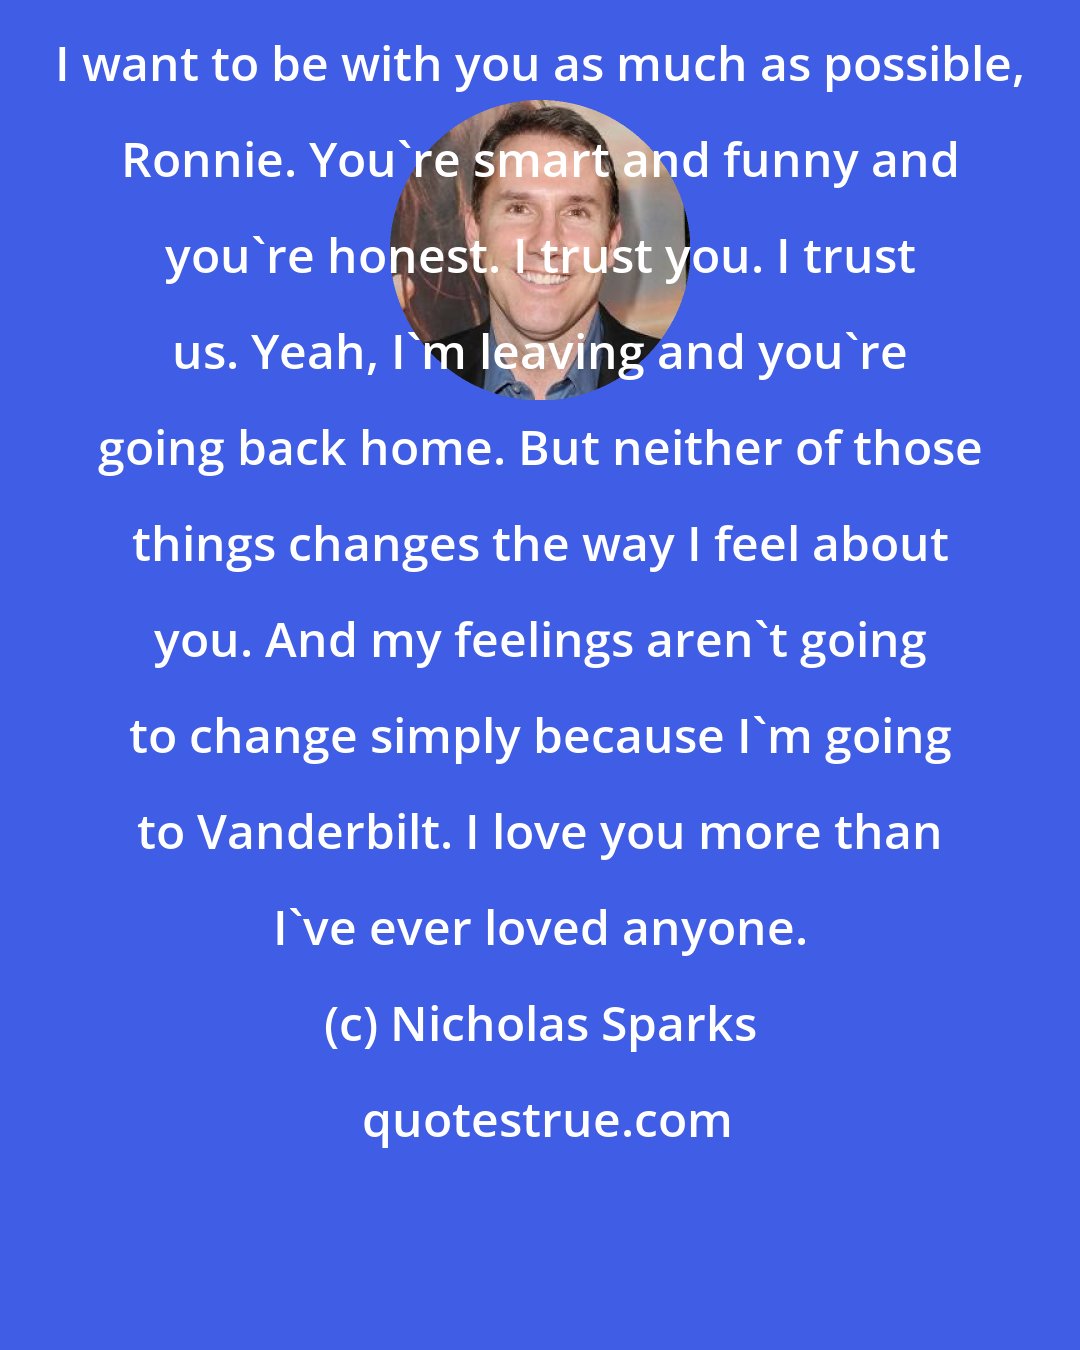 Nicholas Sparks: I want to be with you as much as possible, Ronnie. You're smart and funny and you're honest. I trust you. I trust us. Yeah, I'm leaving and you're going back home. But neither of those things changes the way I feel about you. And my feelings aren't going to change simply because I'm going to Vanderbilt. I love you more than I've ever loved anyone.